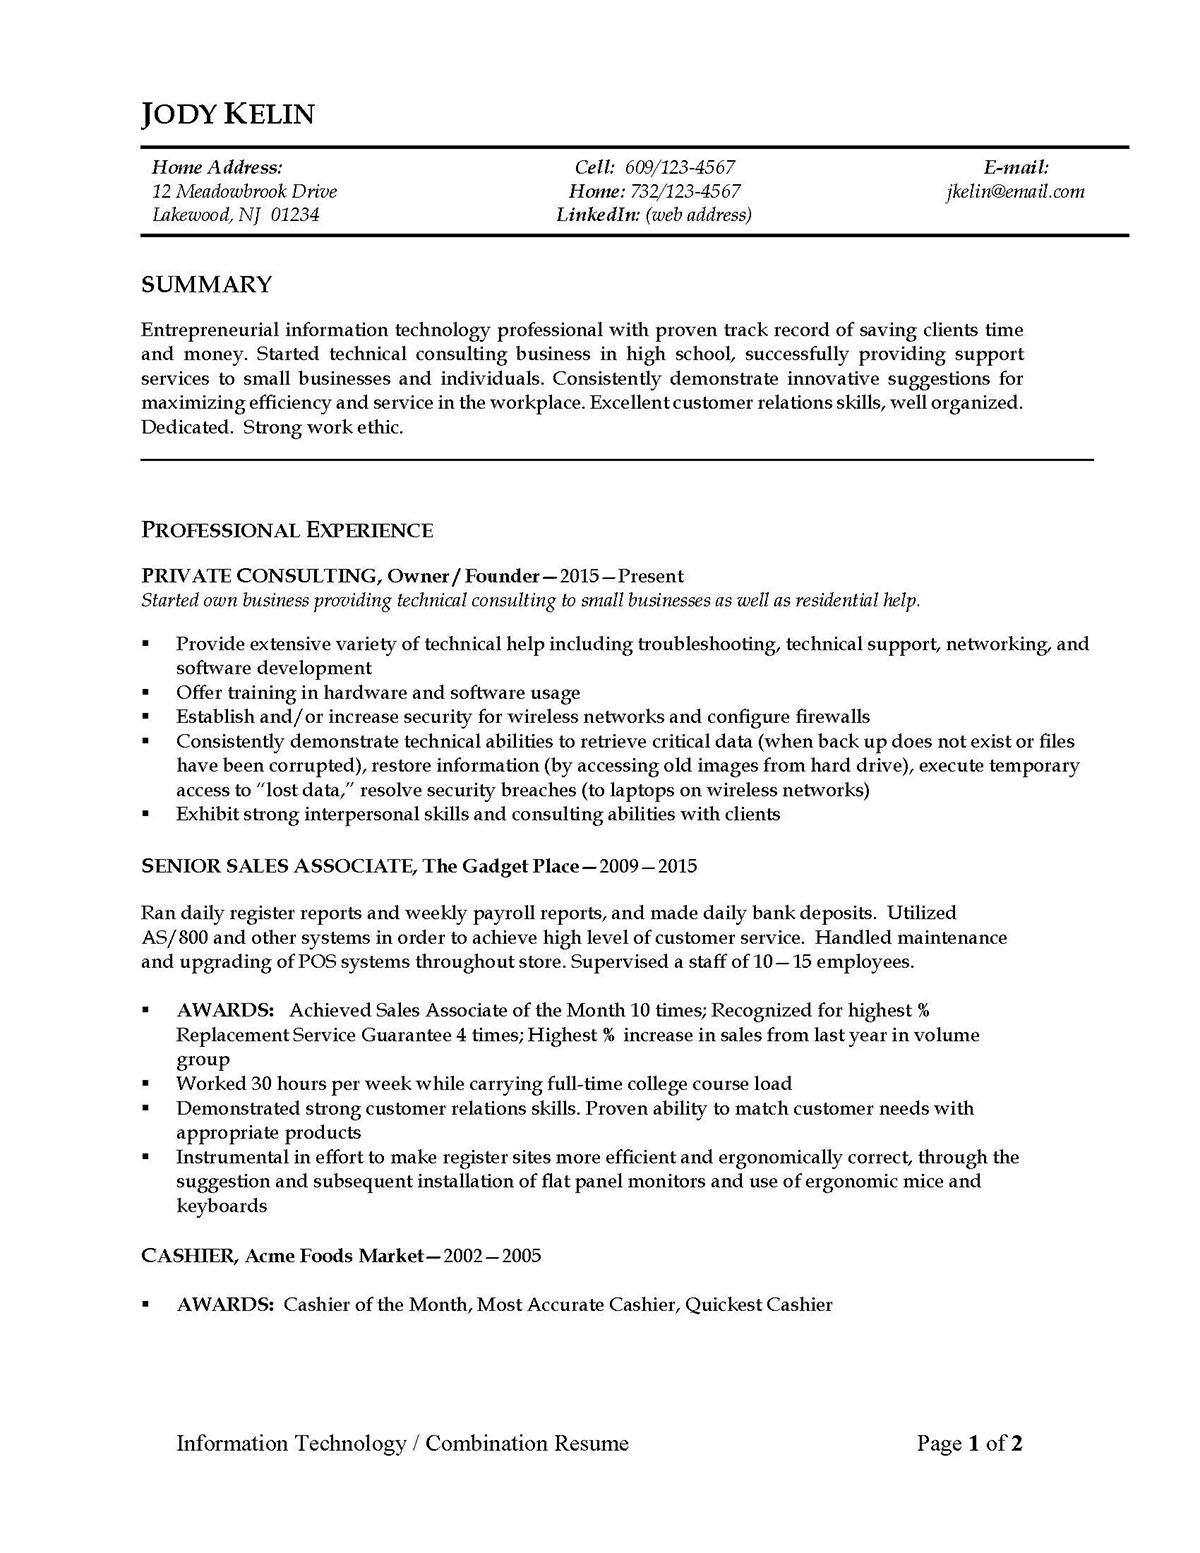 Sample resume: Information Technology, Entry Level, Combination